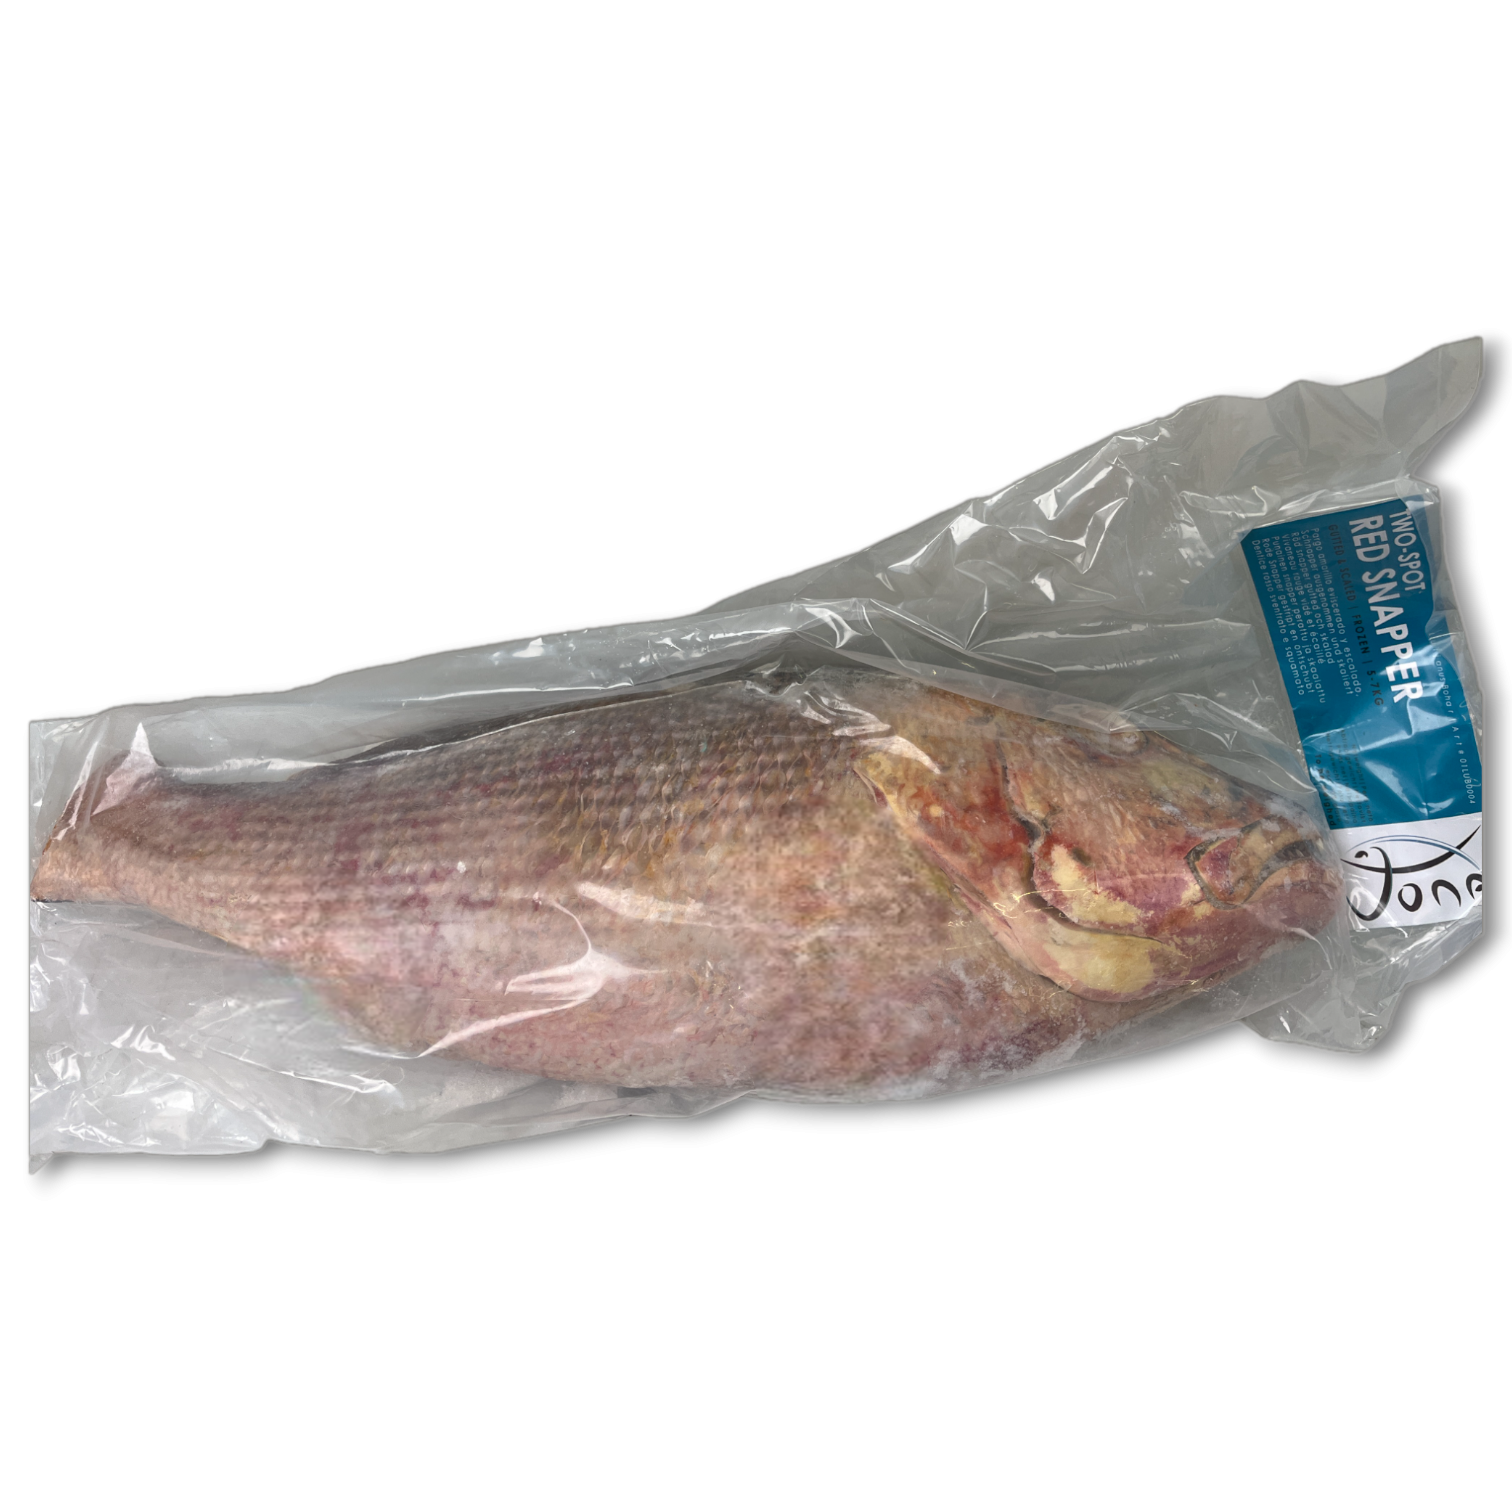 Two-Spot Red Snappers (L. Bohar) 5-7 Kg WGST IWP 22 Kg-IN